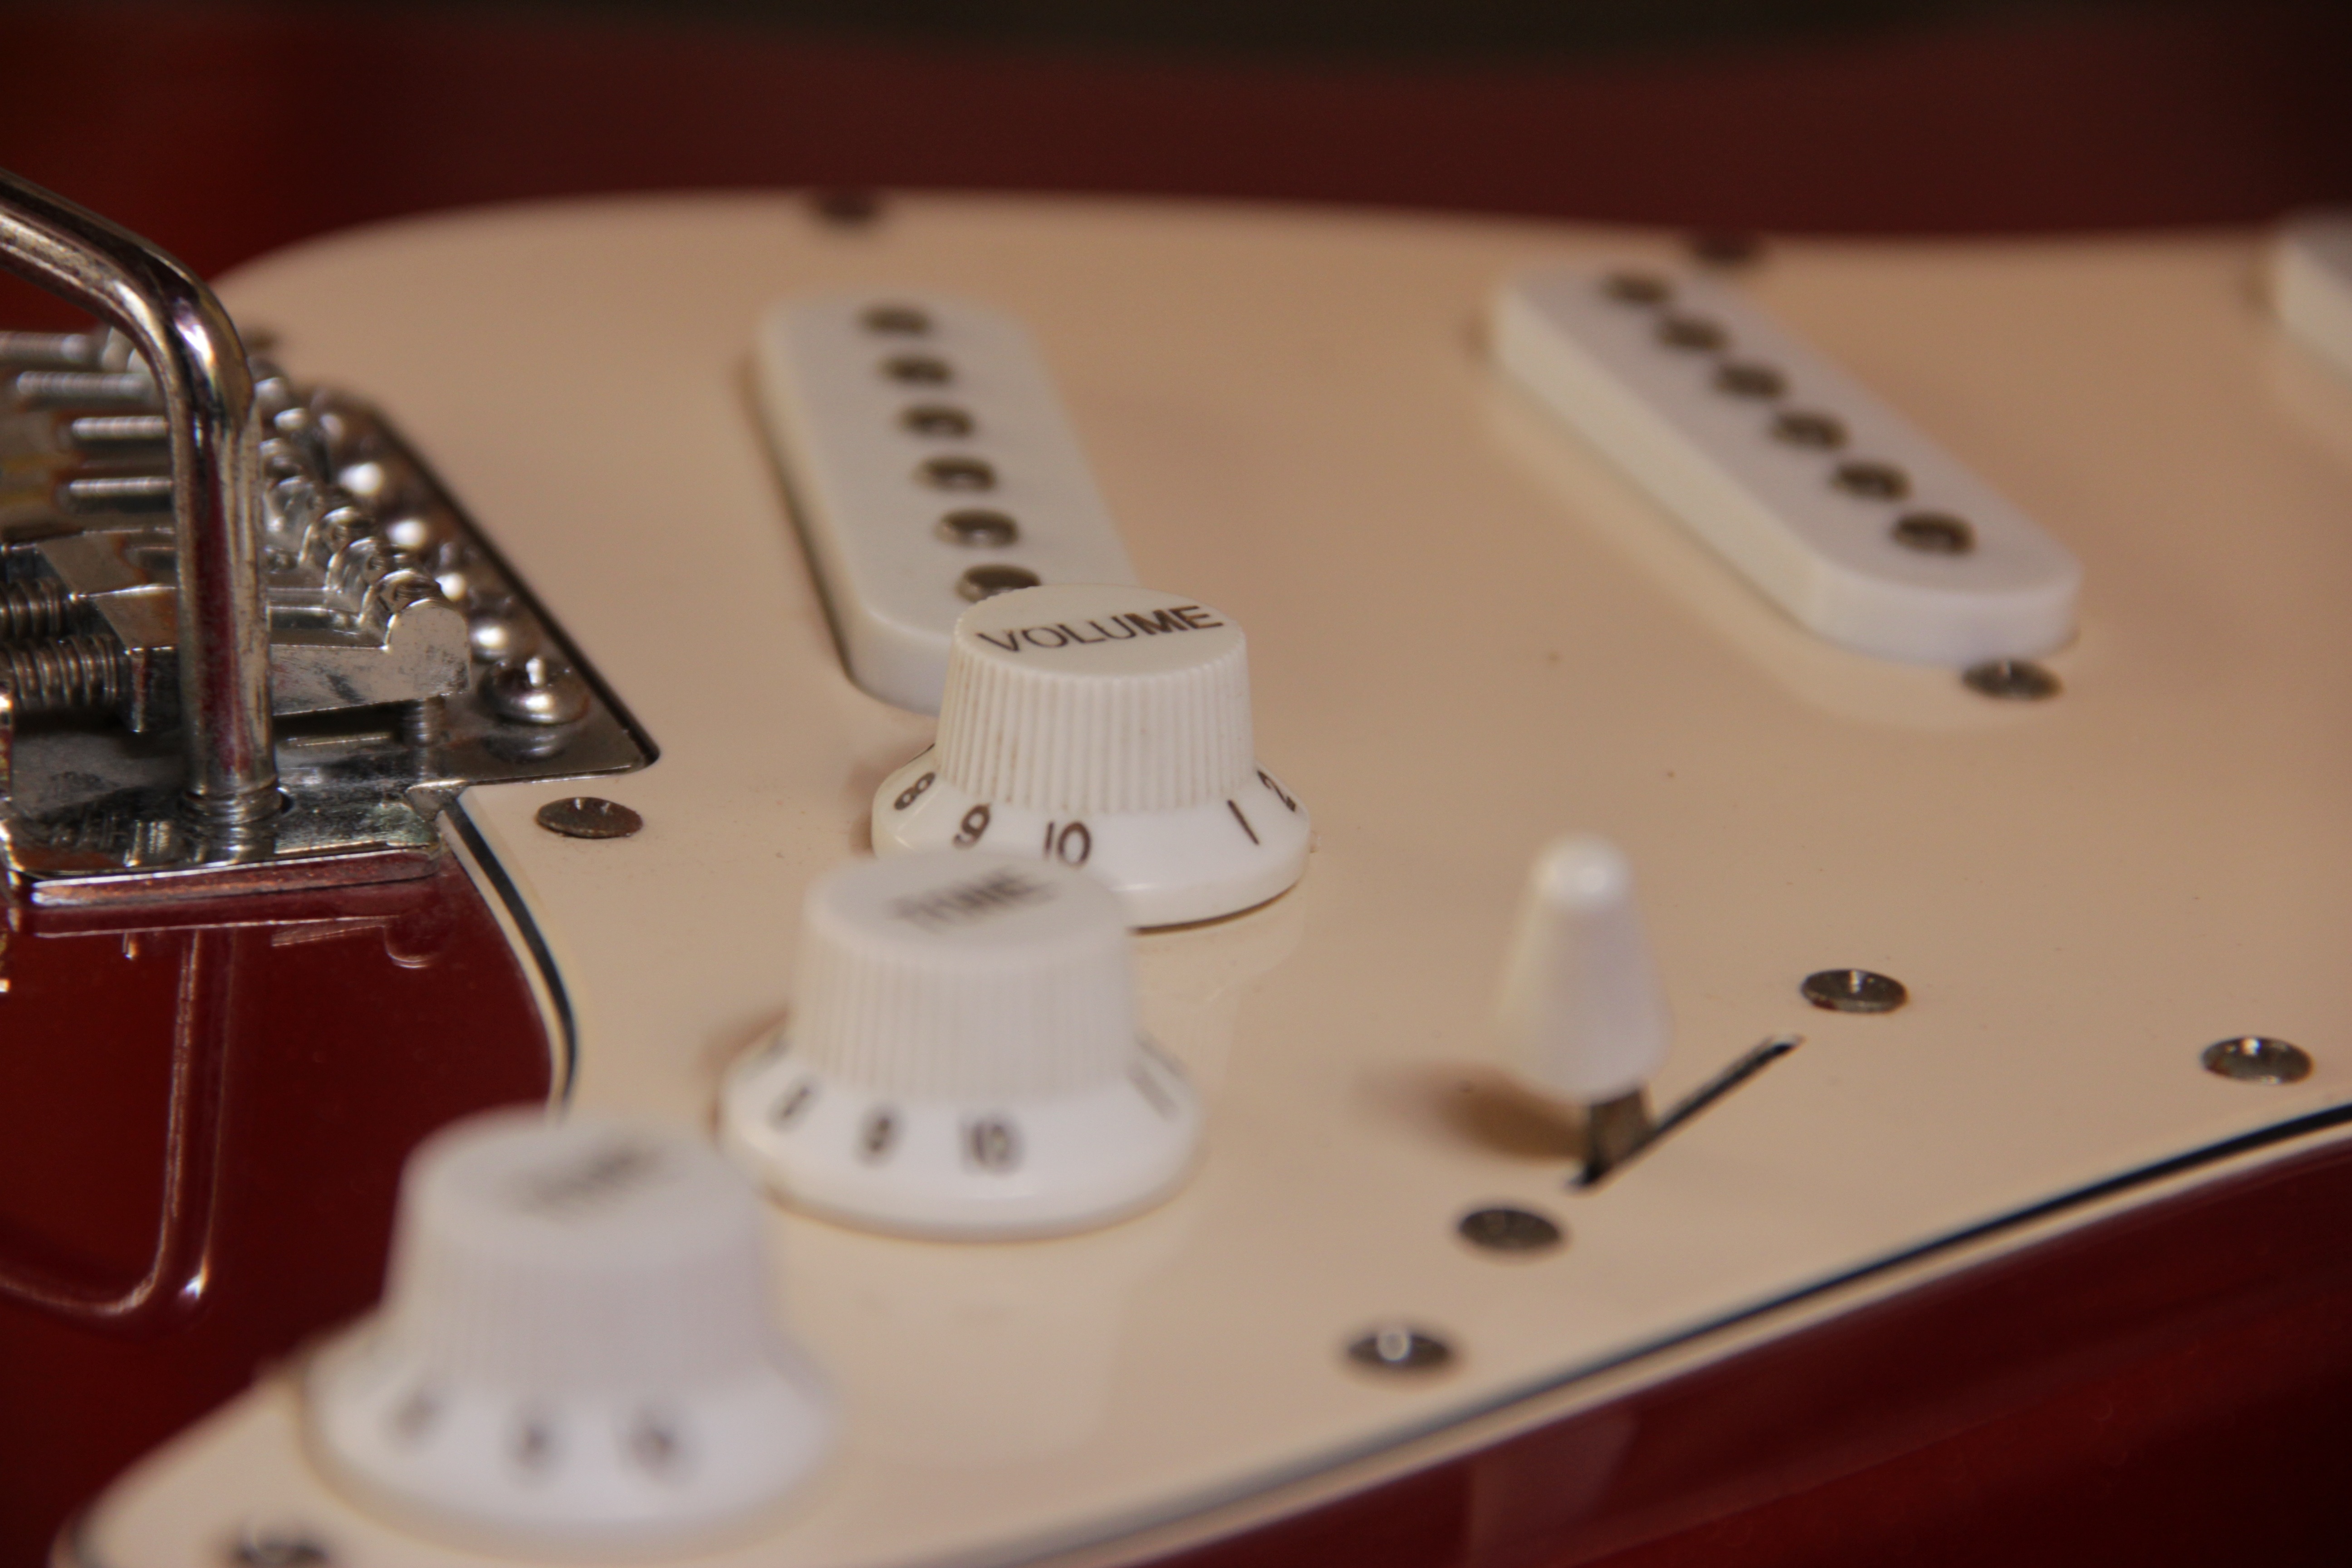 red and white electric guitar